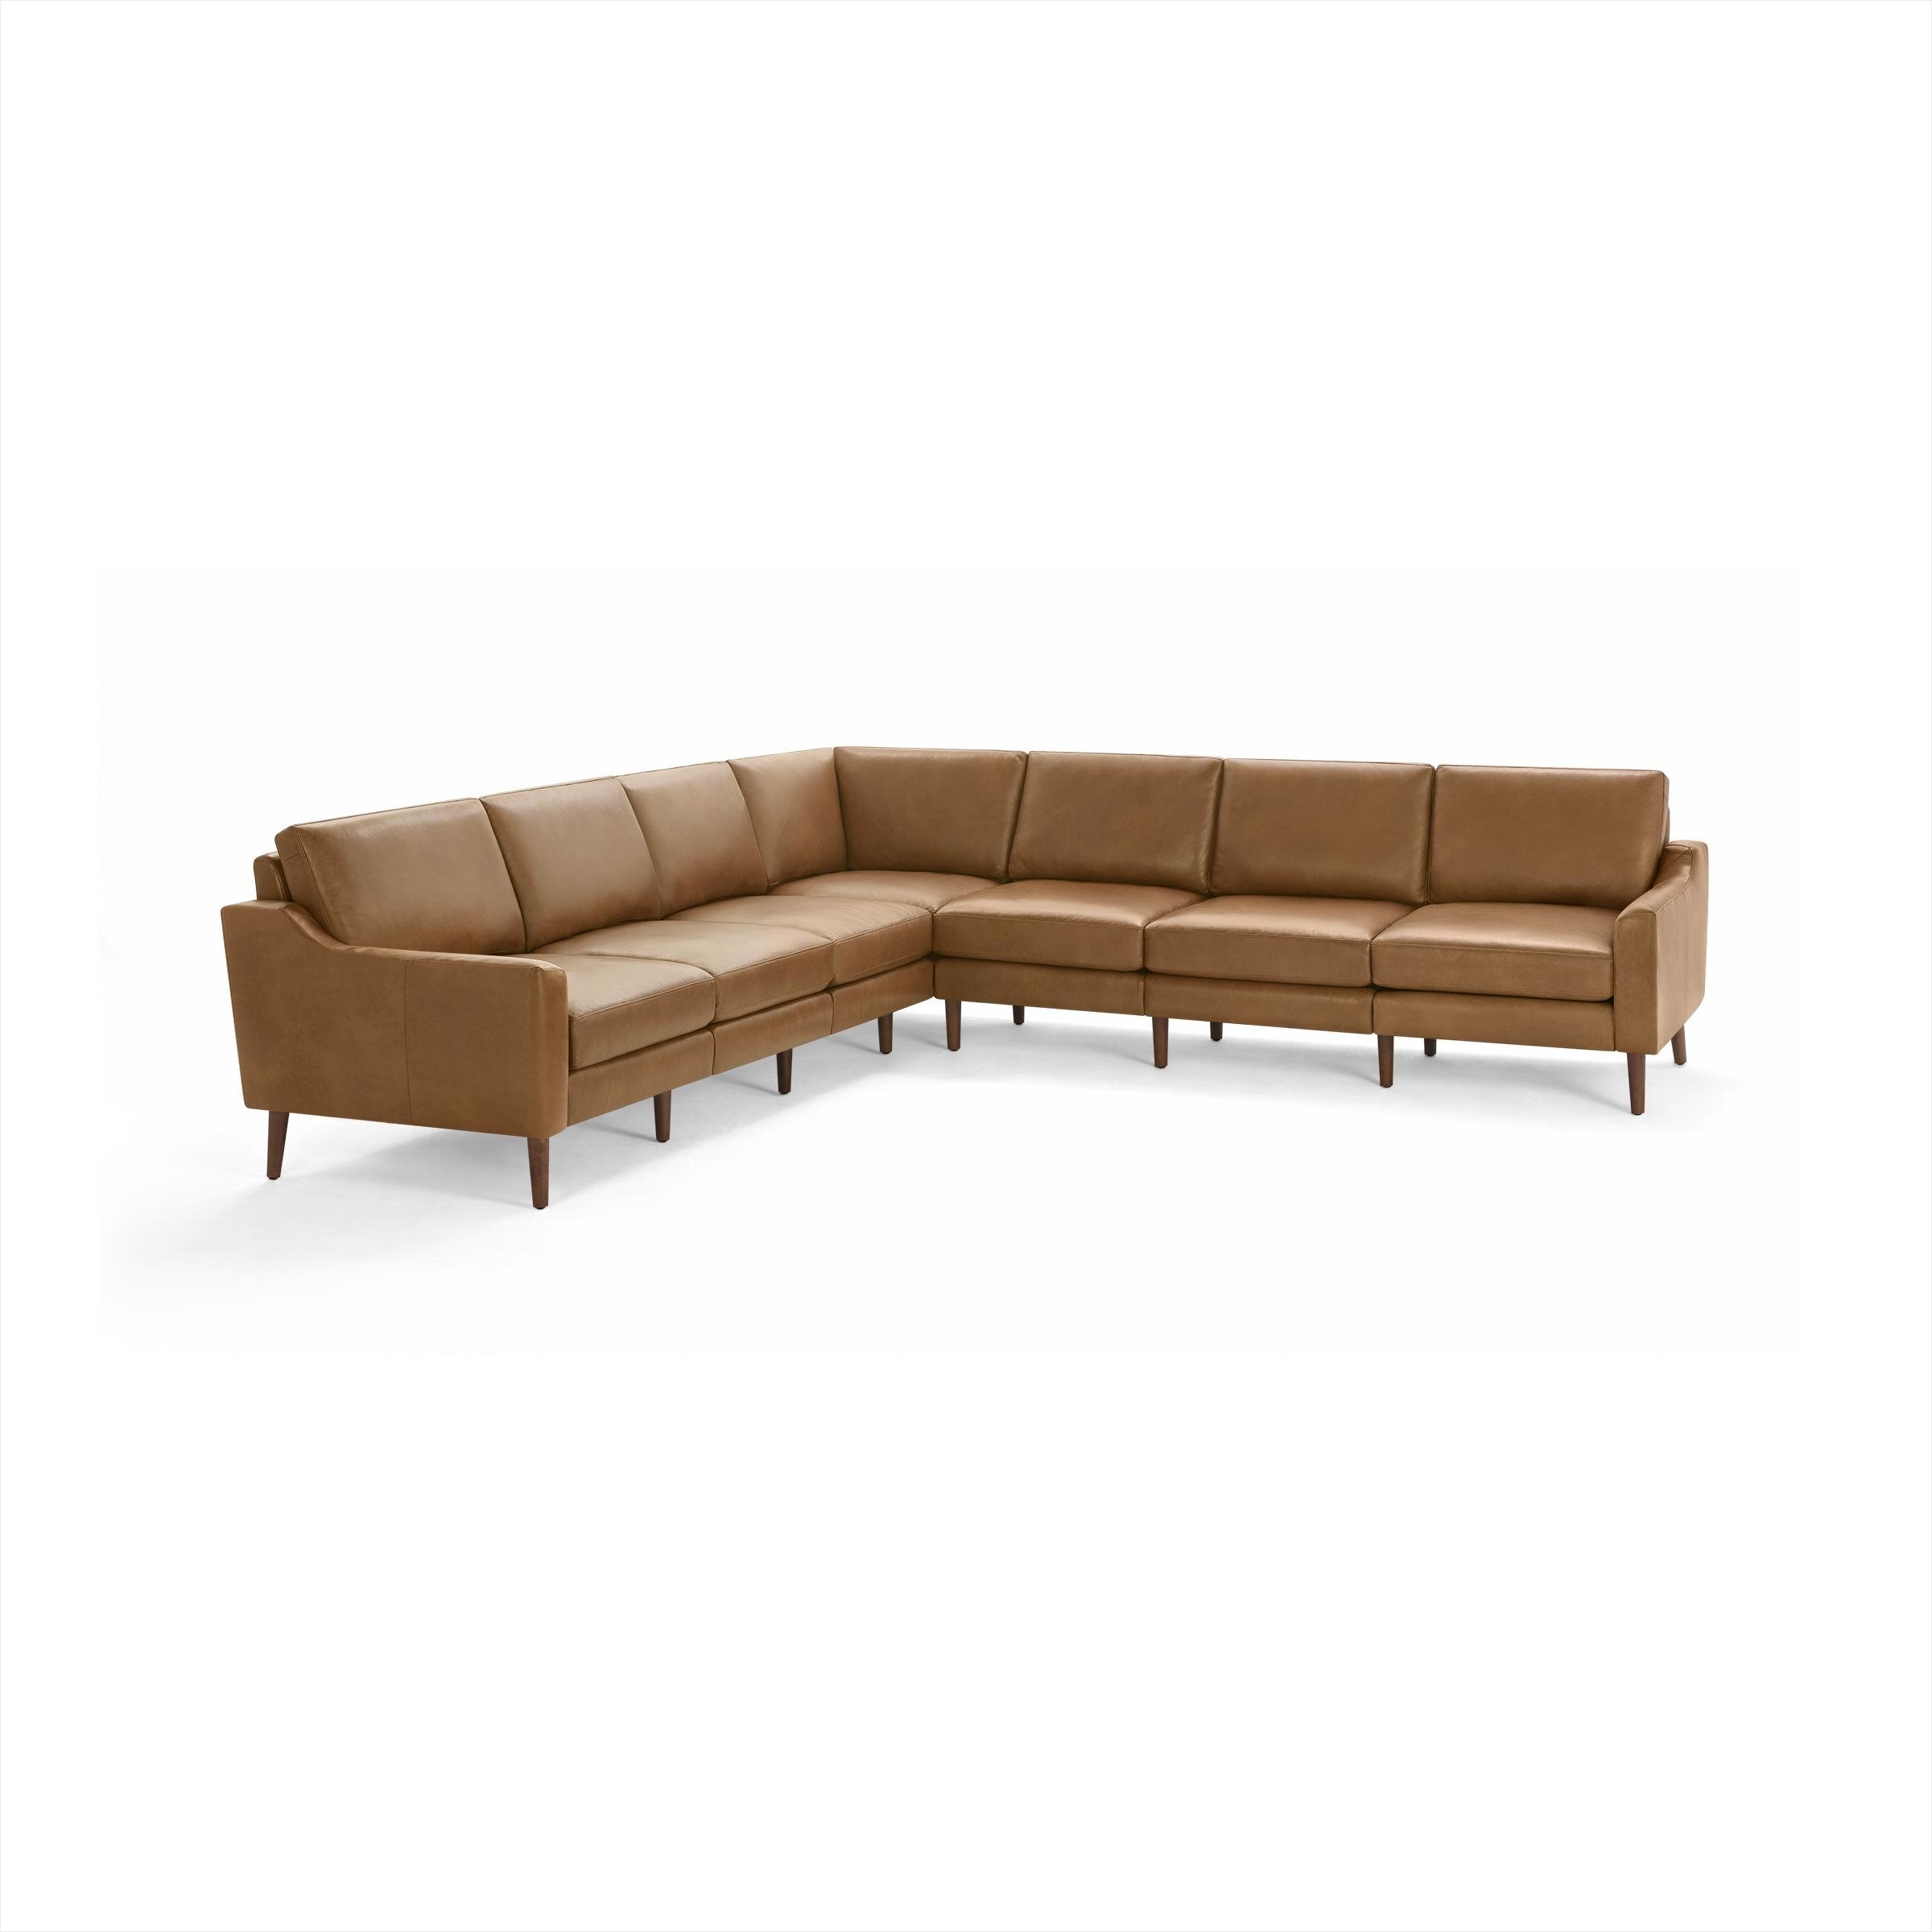 The Slope Nomad Leather 7-Seat Corner Sectional in Camel, Walnut Legs - Image 0